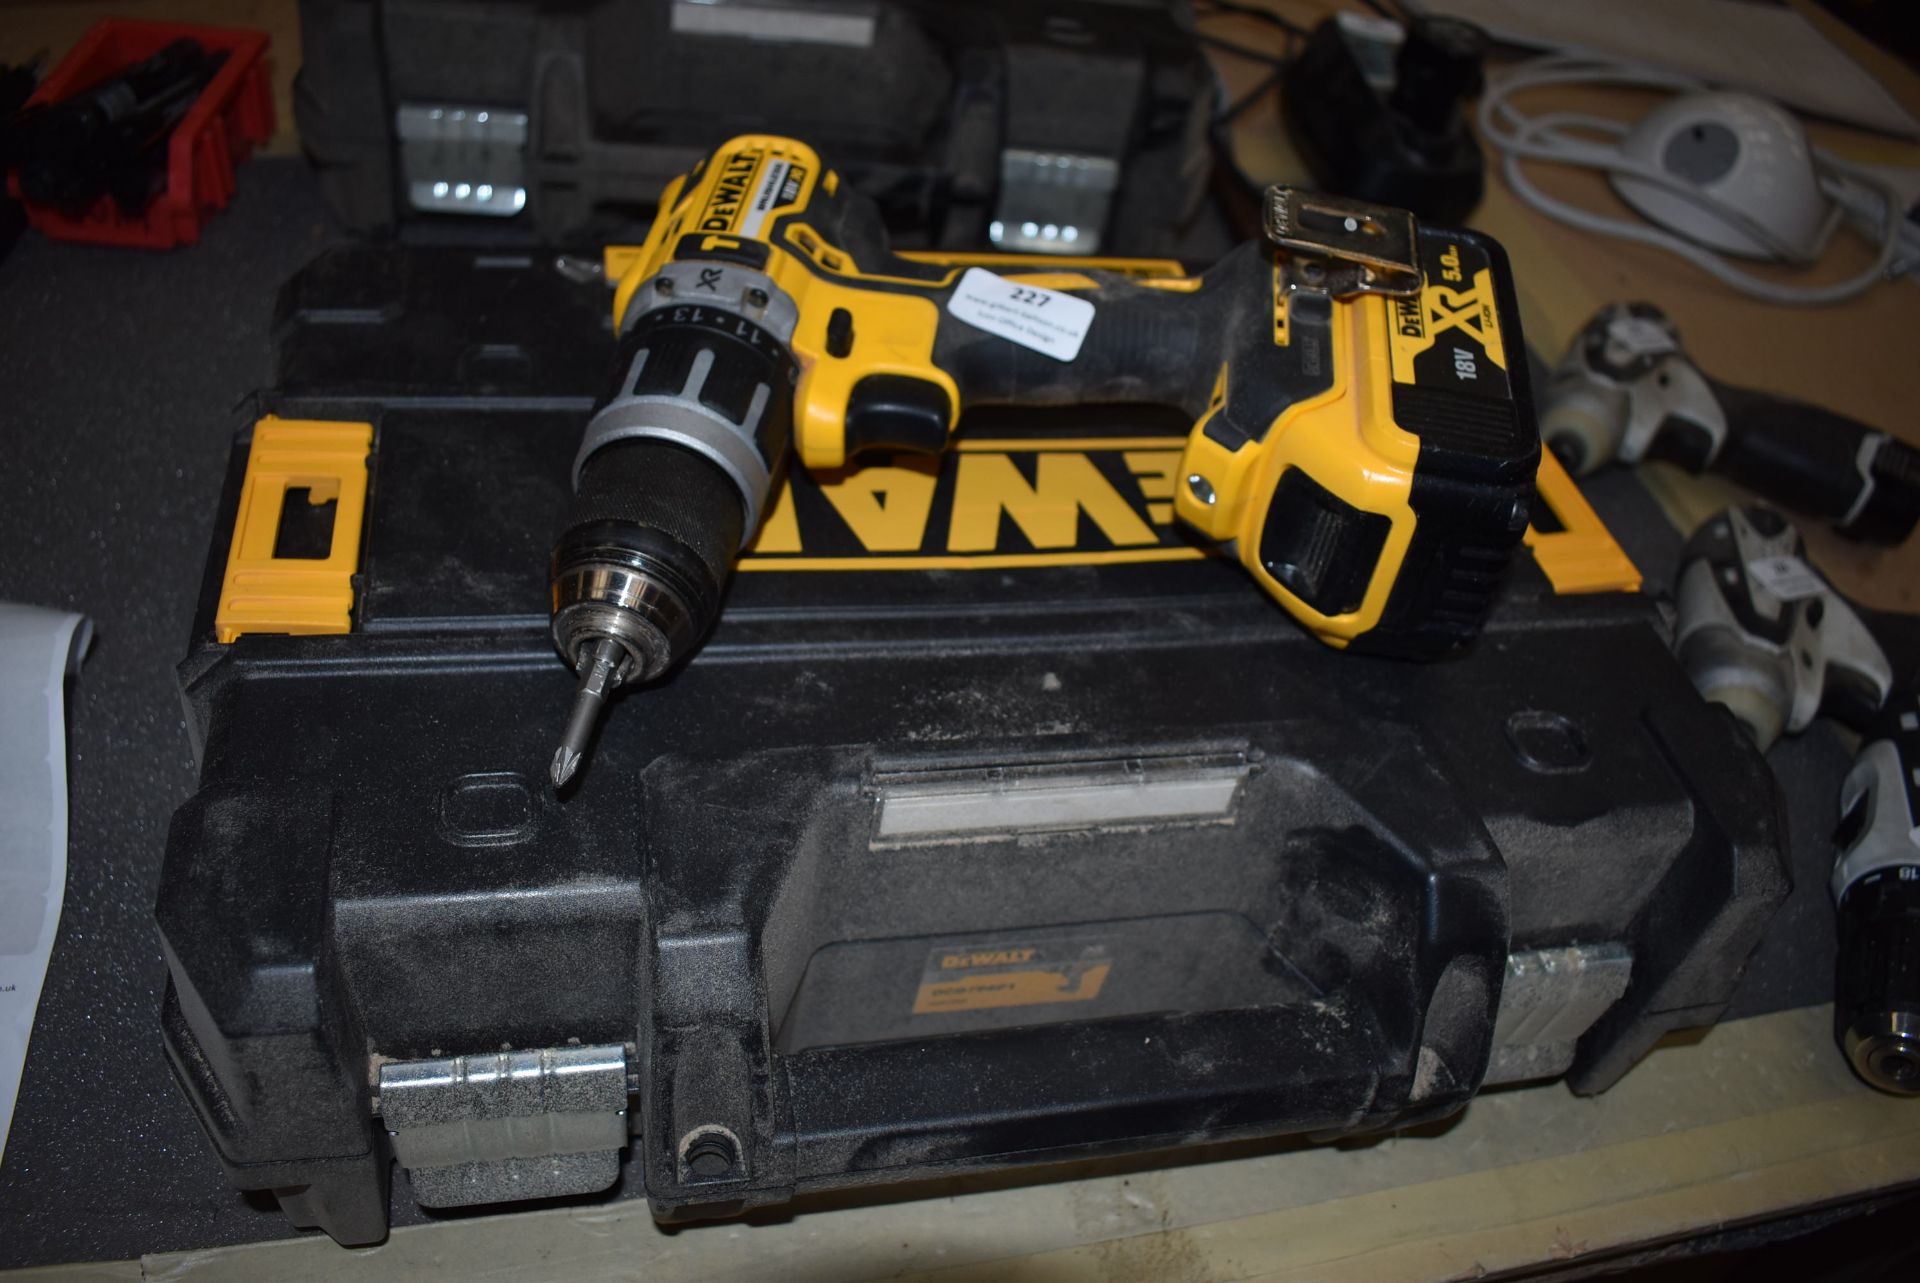 *Dewalt Brushless 18v Cordless Drill with Battery and Case (no charger)